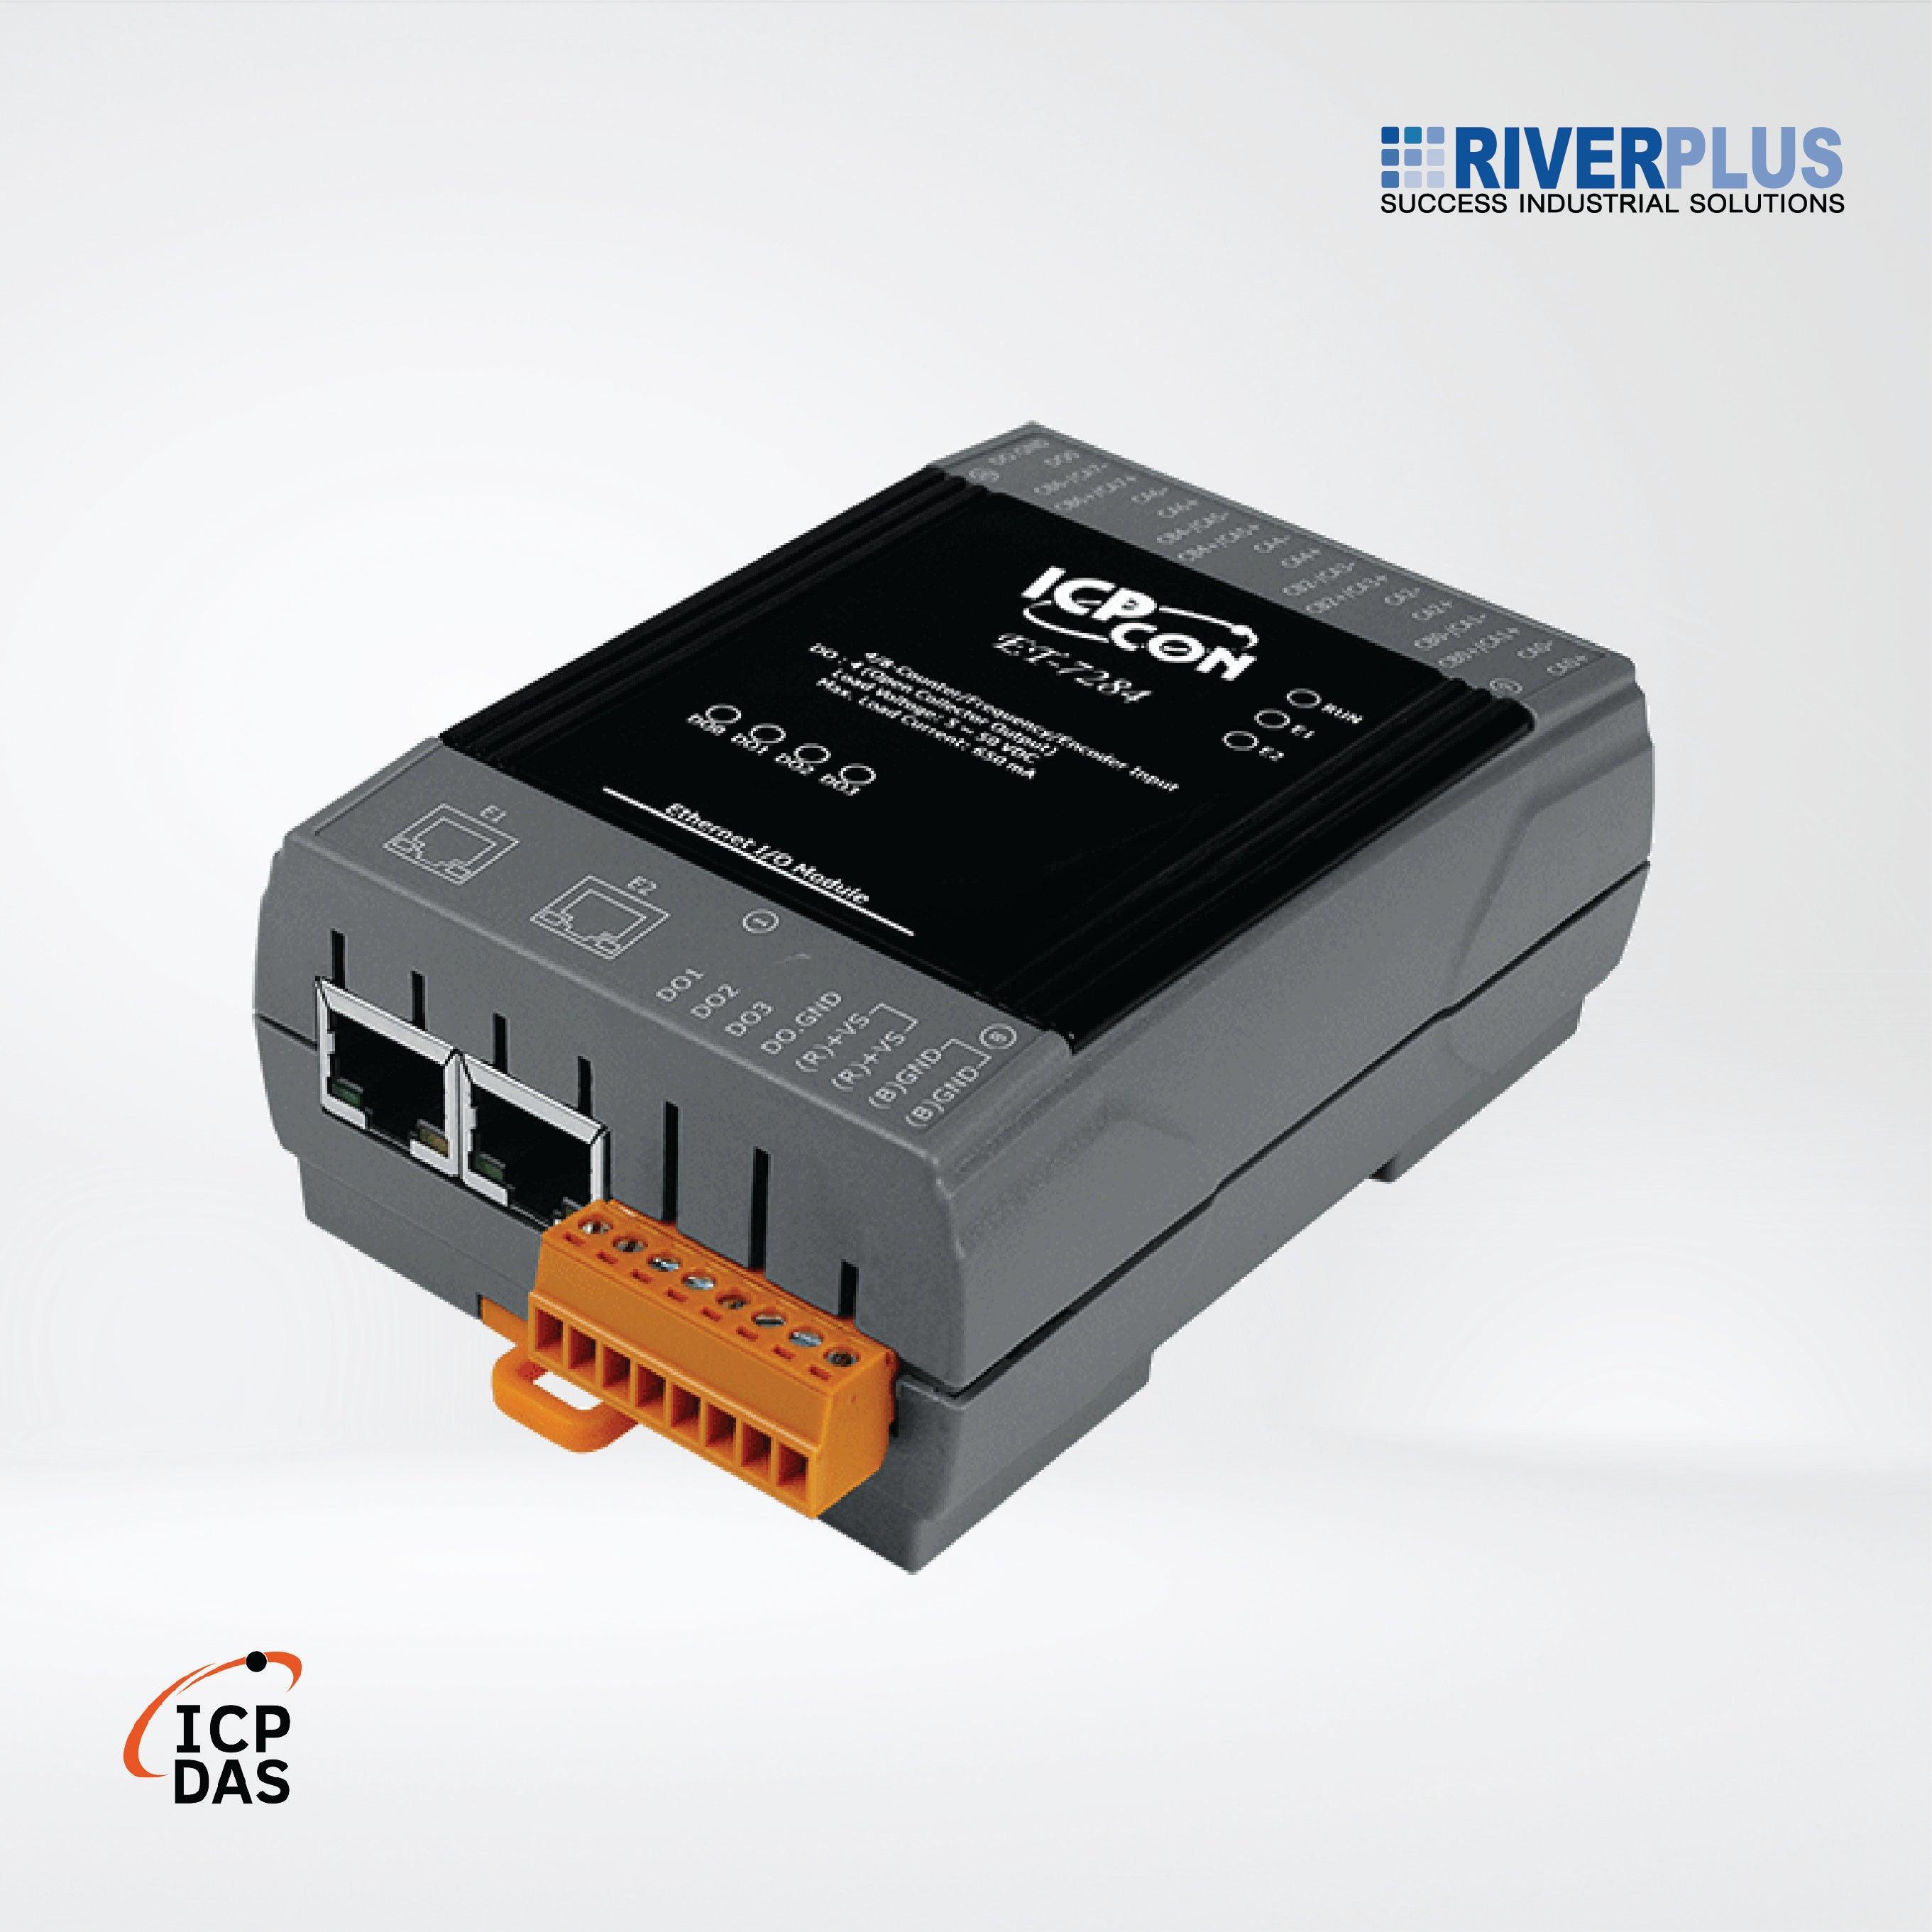 ET-7284 Ethernet I/O Module 2-port Ethernet Switch, 4/8-ch and 4-ch DO - Riverplus